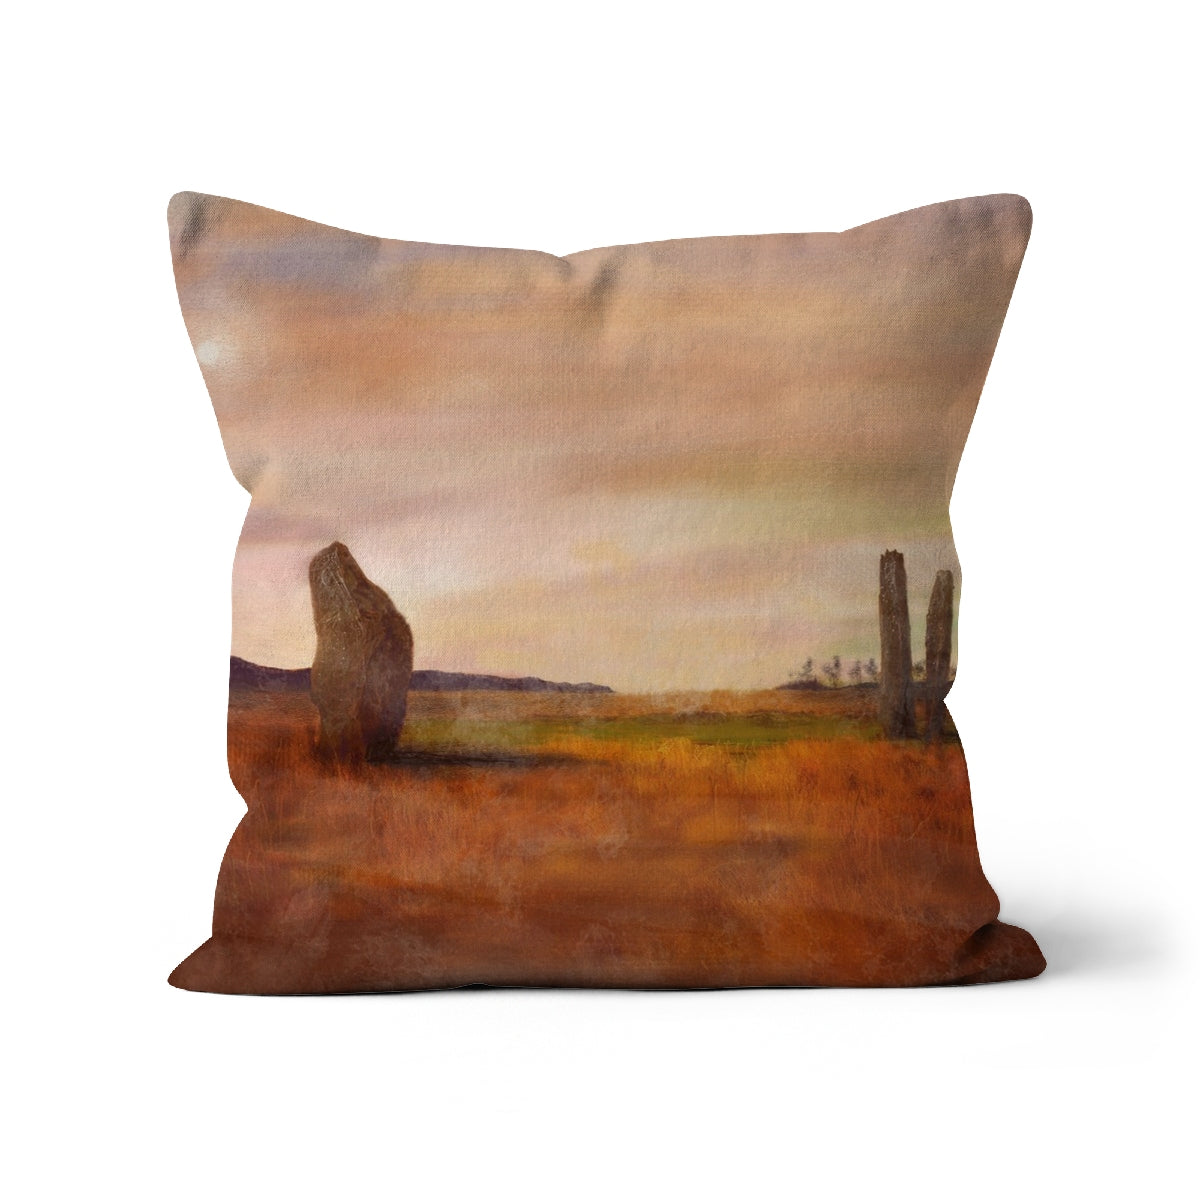 Machrie Moor Arran Art Gifts Cushion-Cushions-Arran Art Gallery-Faux Suede-16"x16"-Paintings, Prints, Homeware, Art Gifts From Scotland By Scottish Artist Kevin Hunter